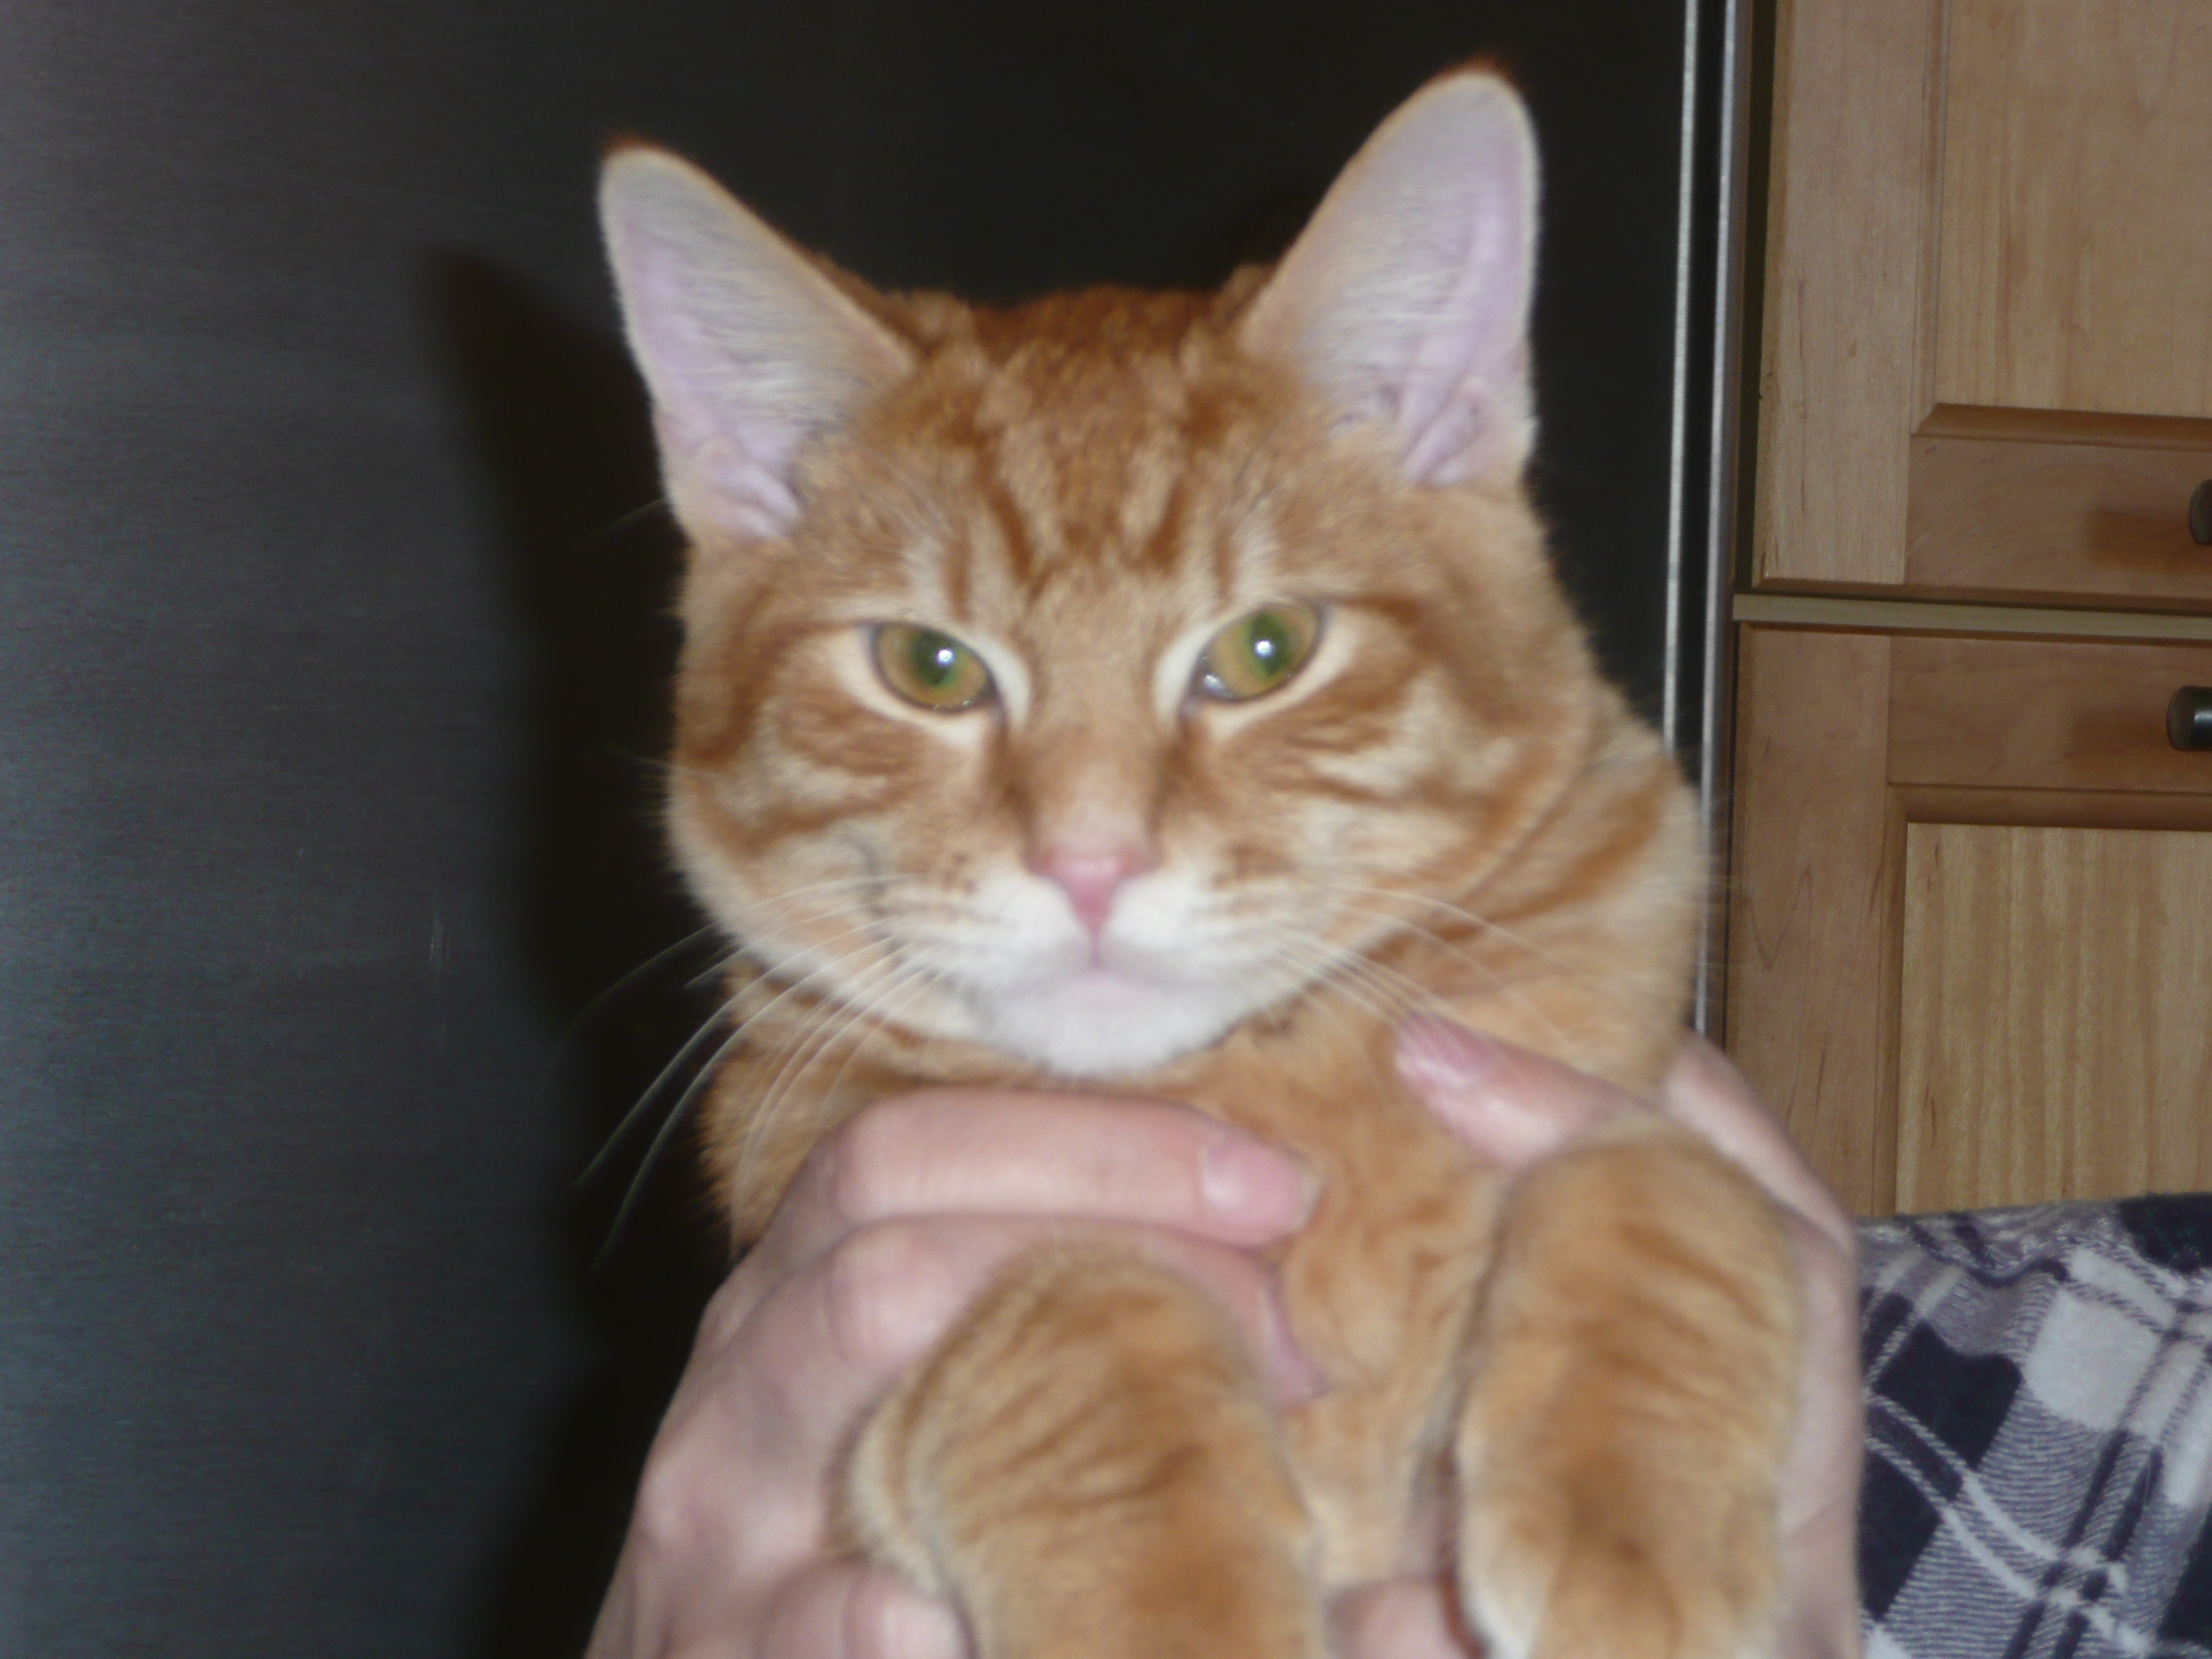 Close-up photograph of an orange tabby cat being held up to the camera